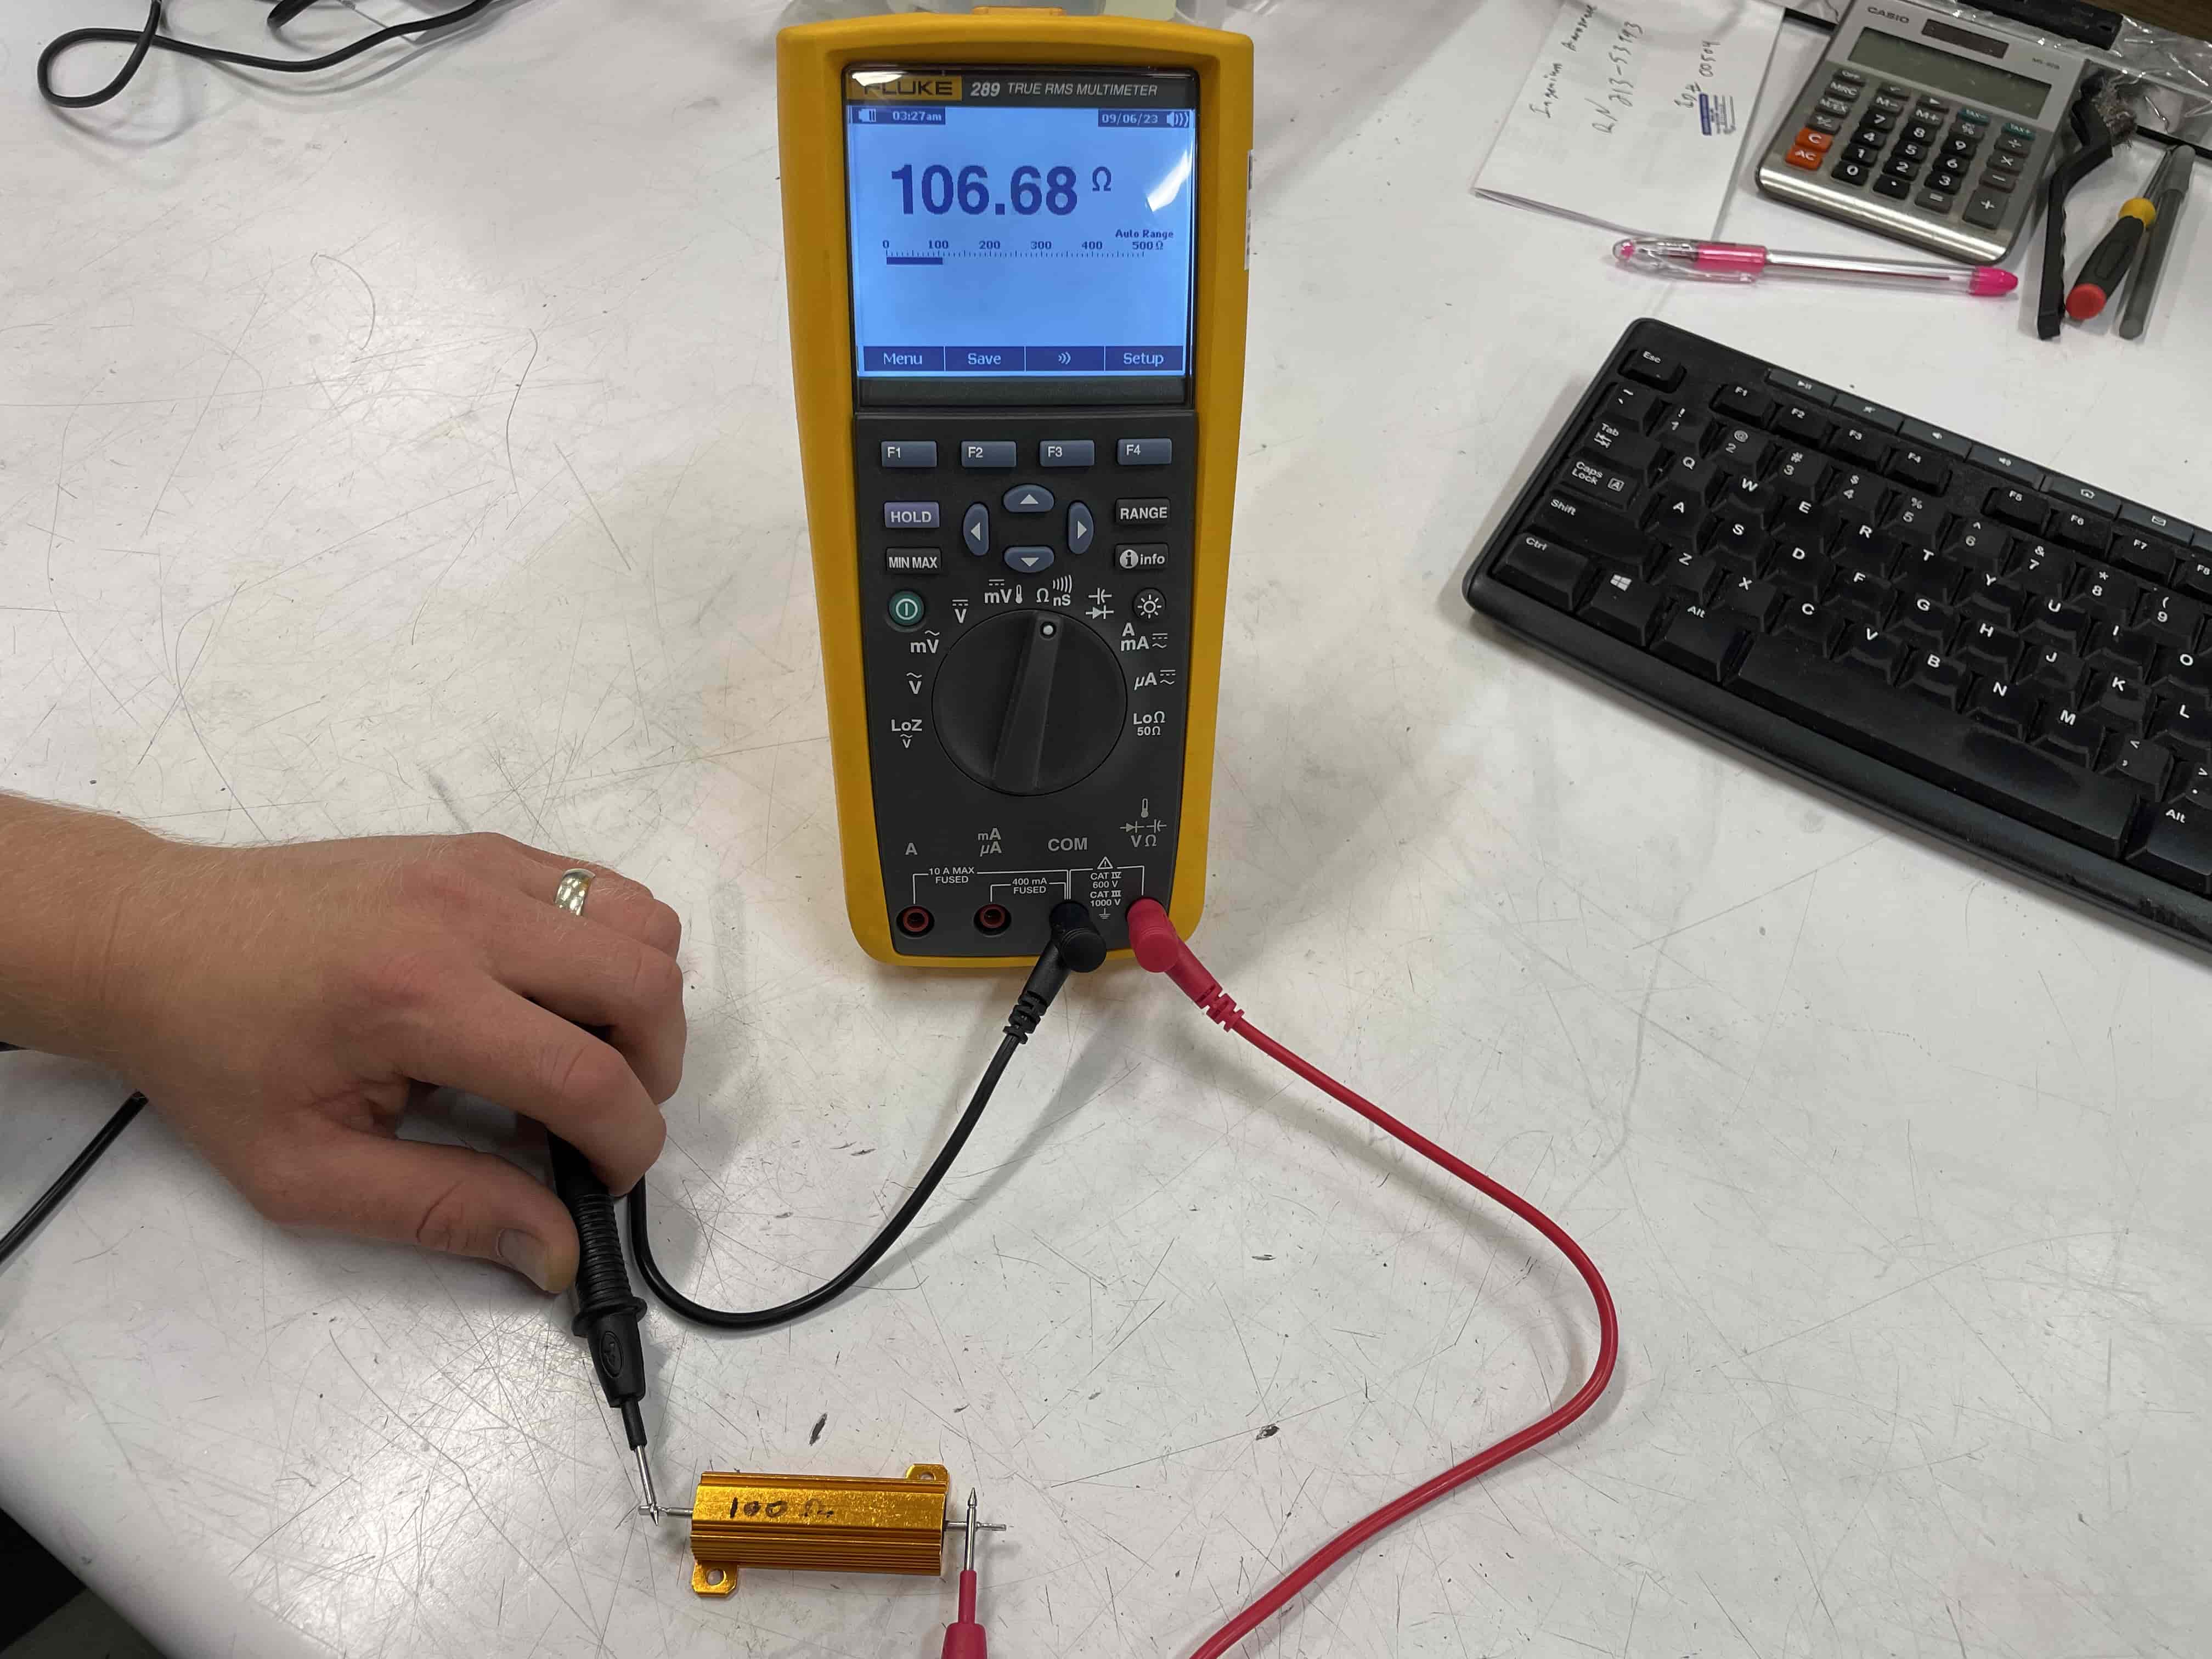 How to Use a Multimeter - Verifying Component Values (Testing a Resistor With a Multimeter)